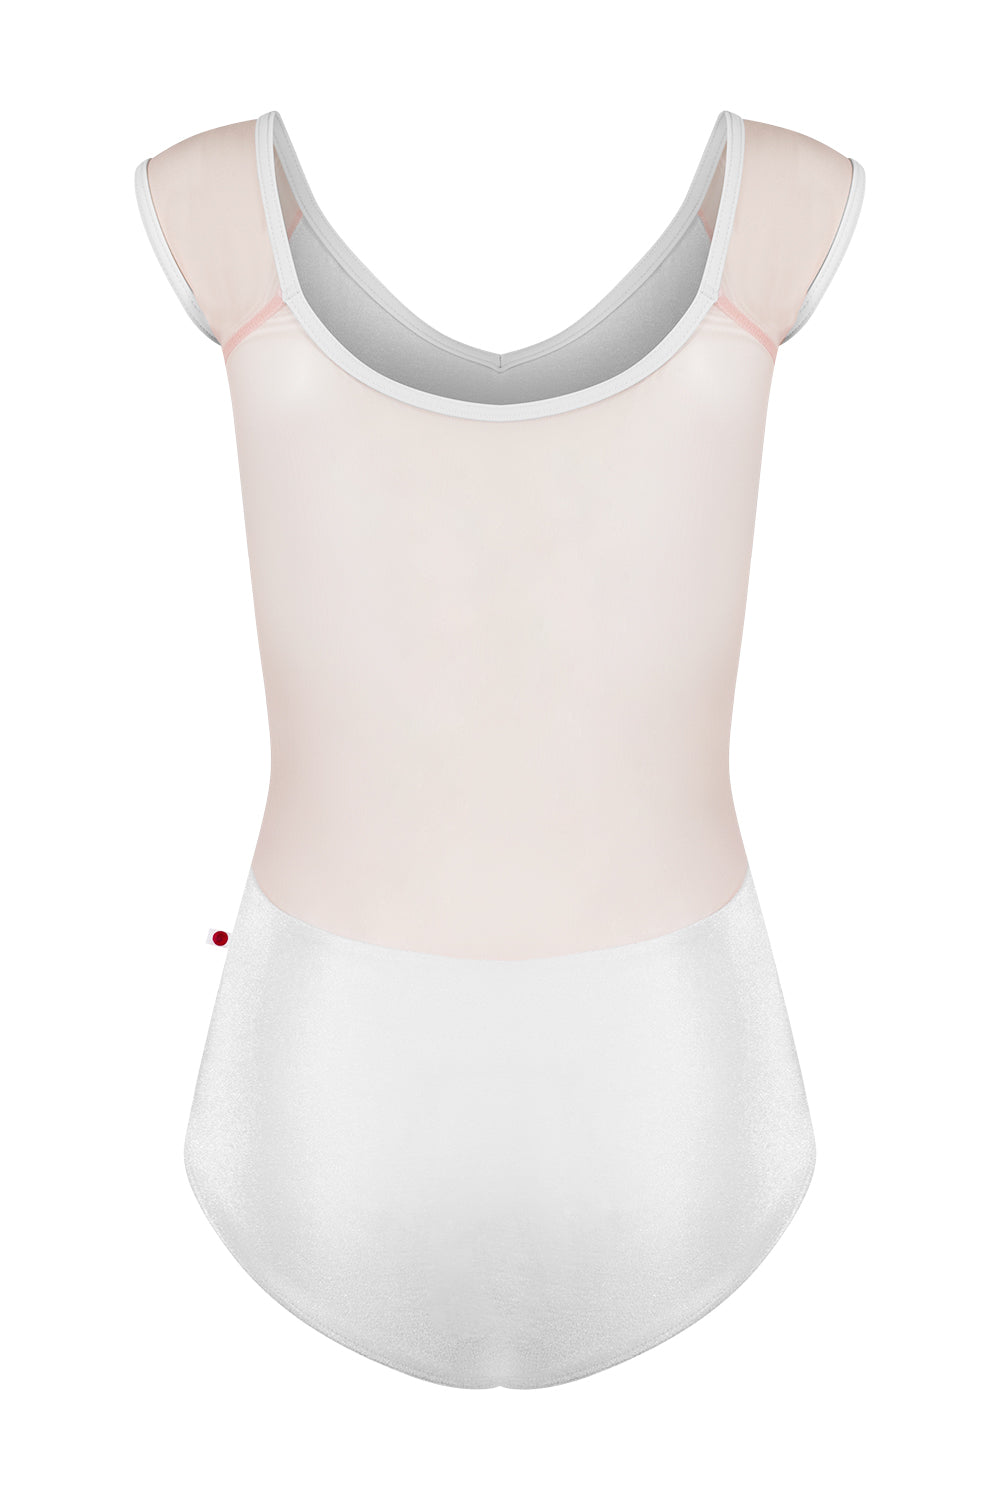 Nina leotard in V-White body color with Mesh Blush top color and T-White trim color